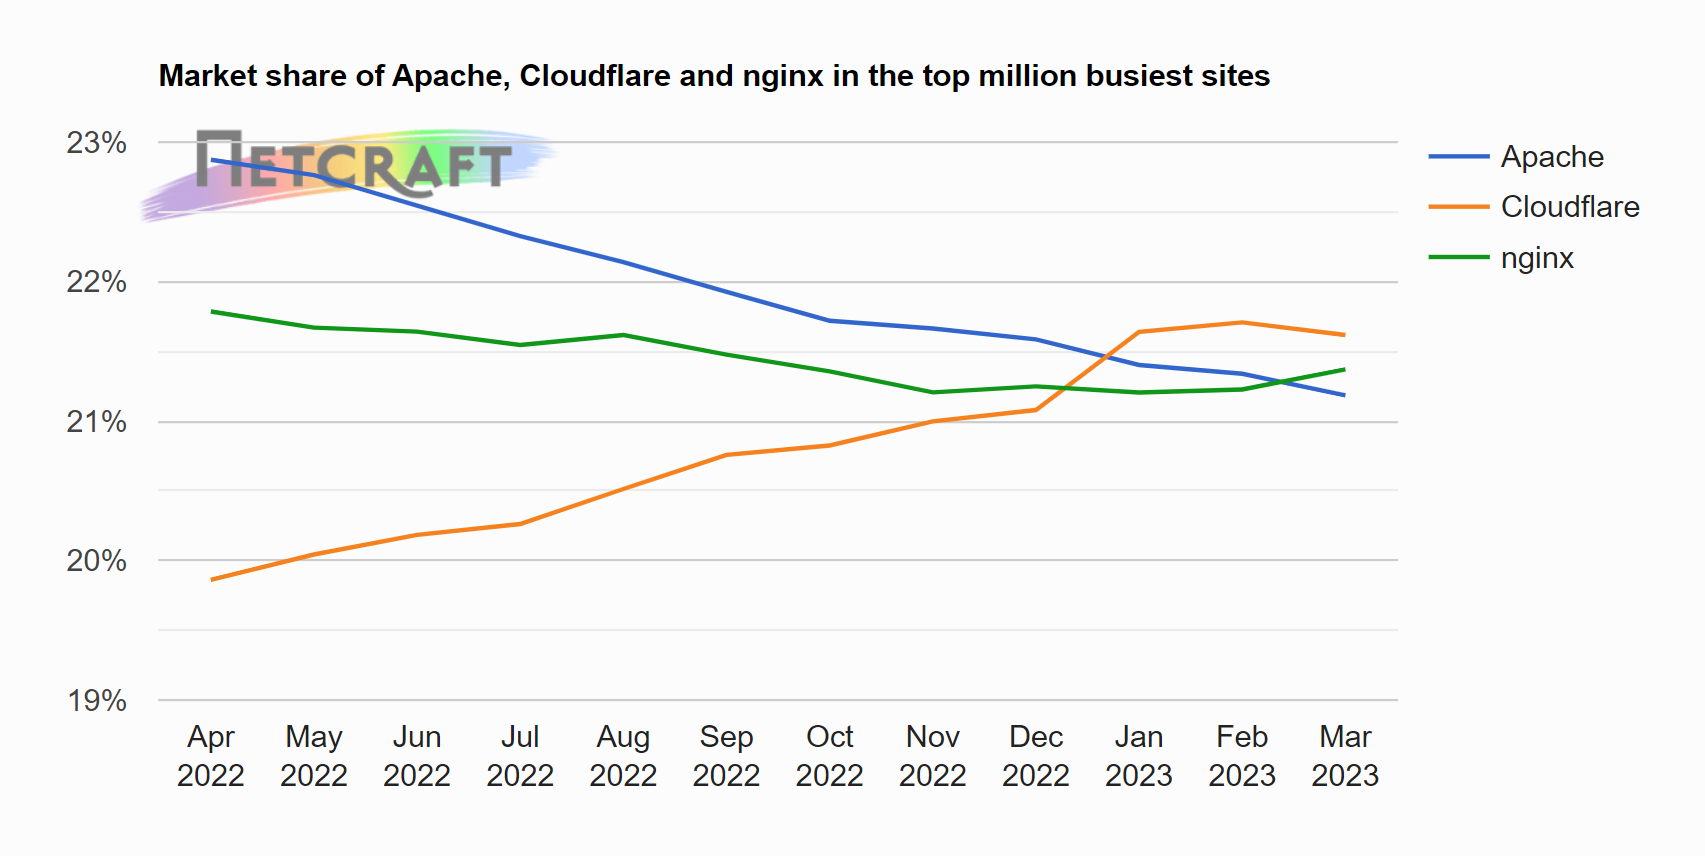 Graph showing market share of Apache, Cloudflare and nginx in the top million busiest sites